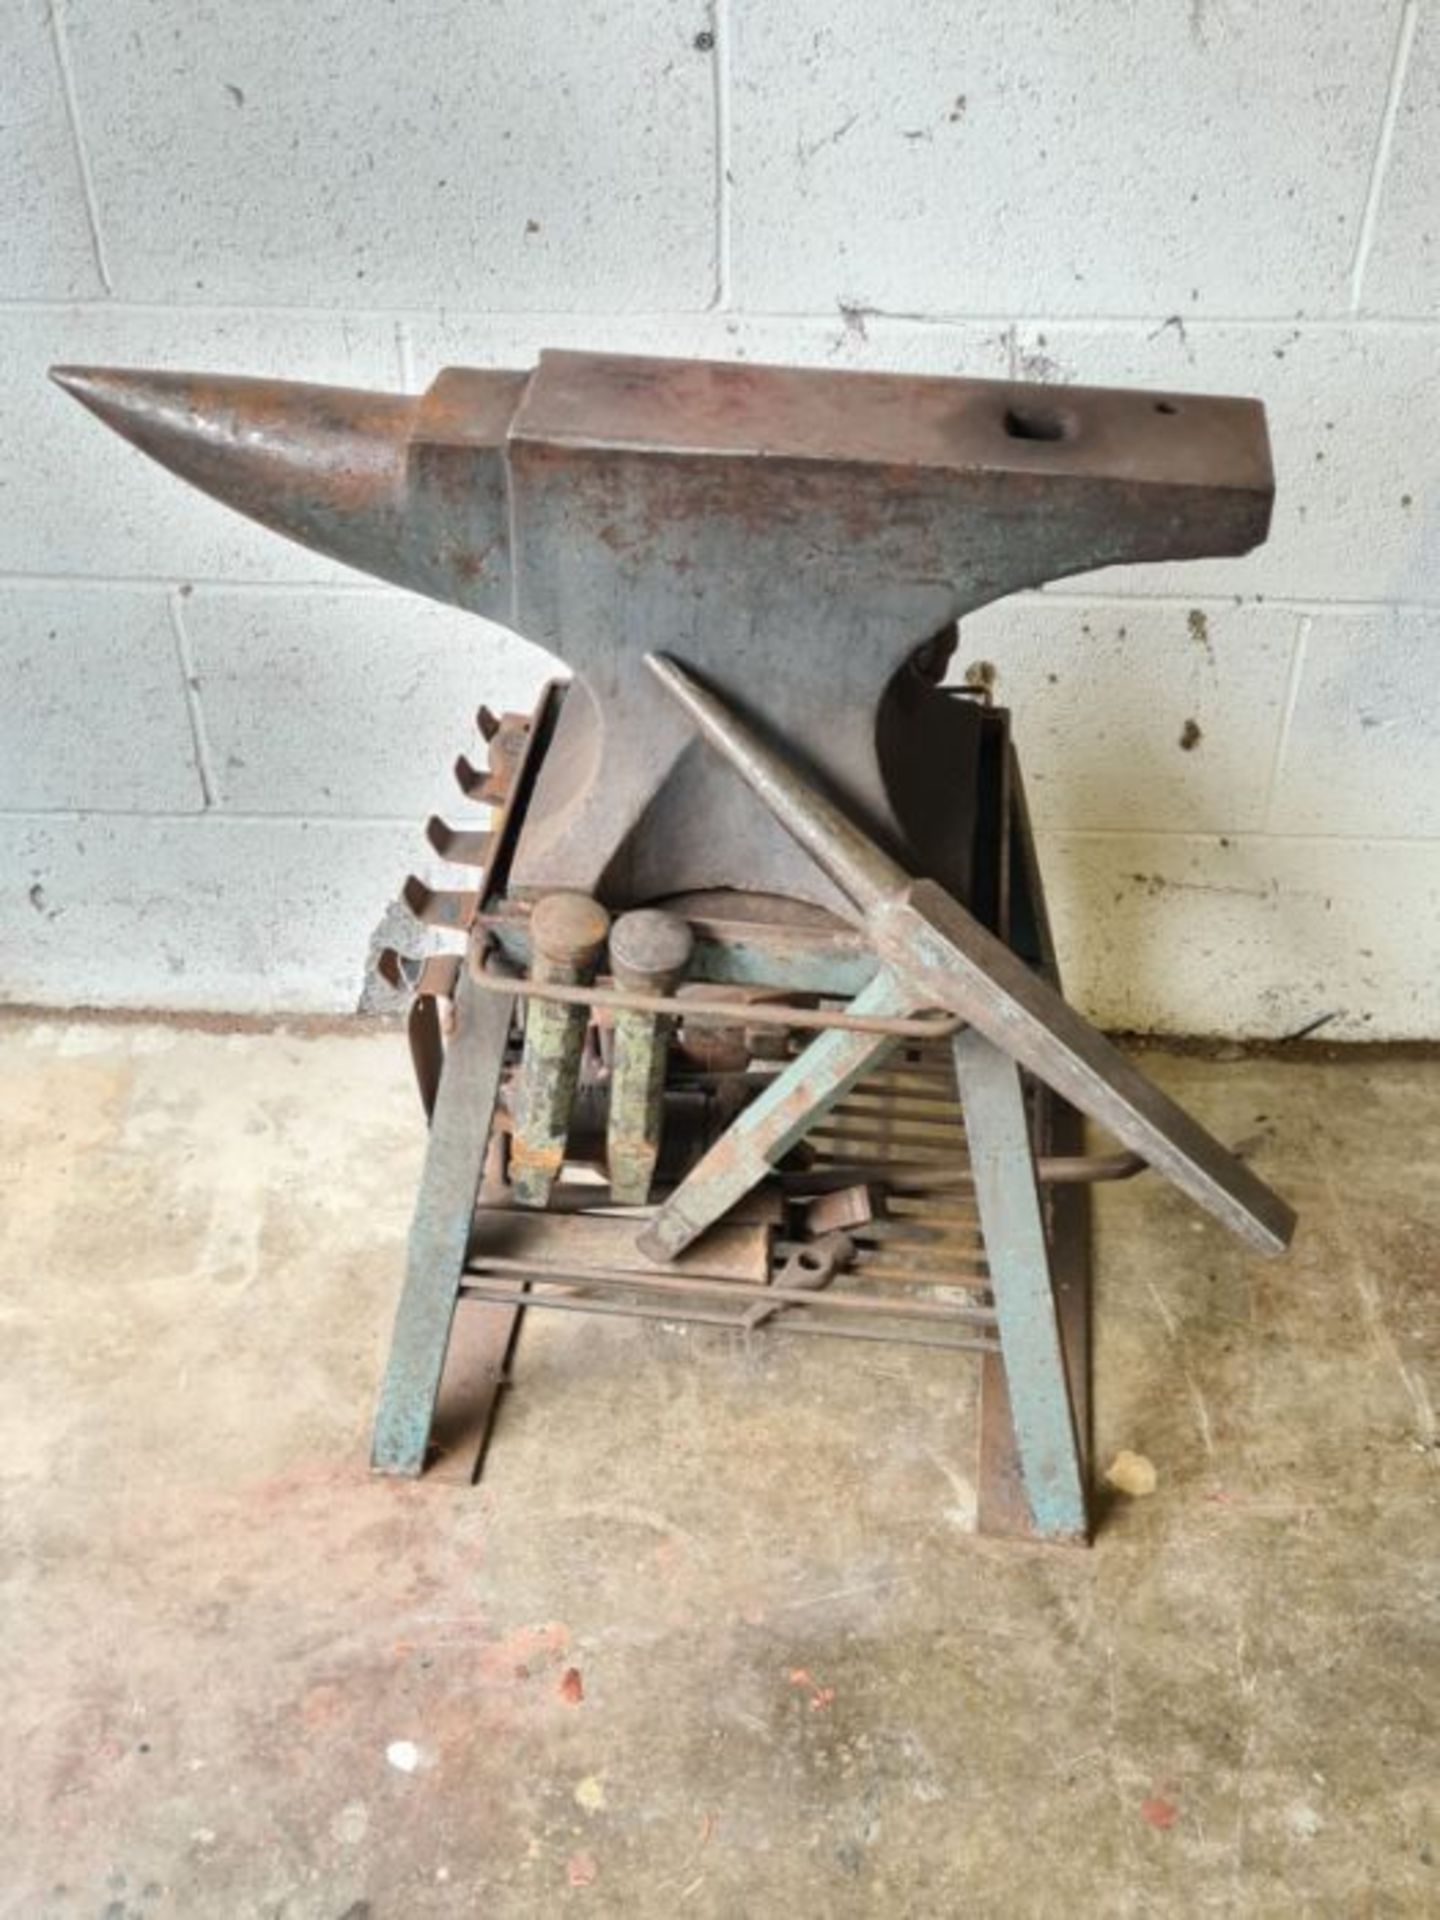 Medium size Blacksmiths anvil on stand and associated tools.